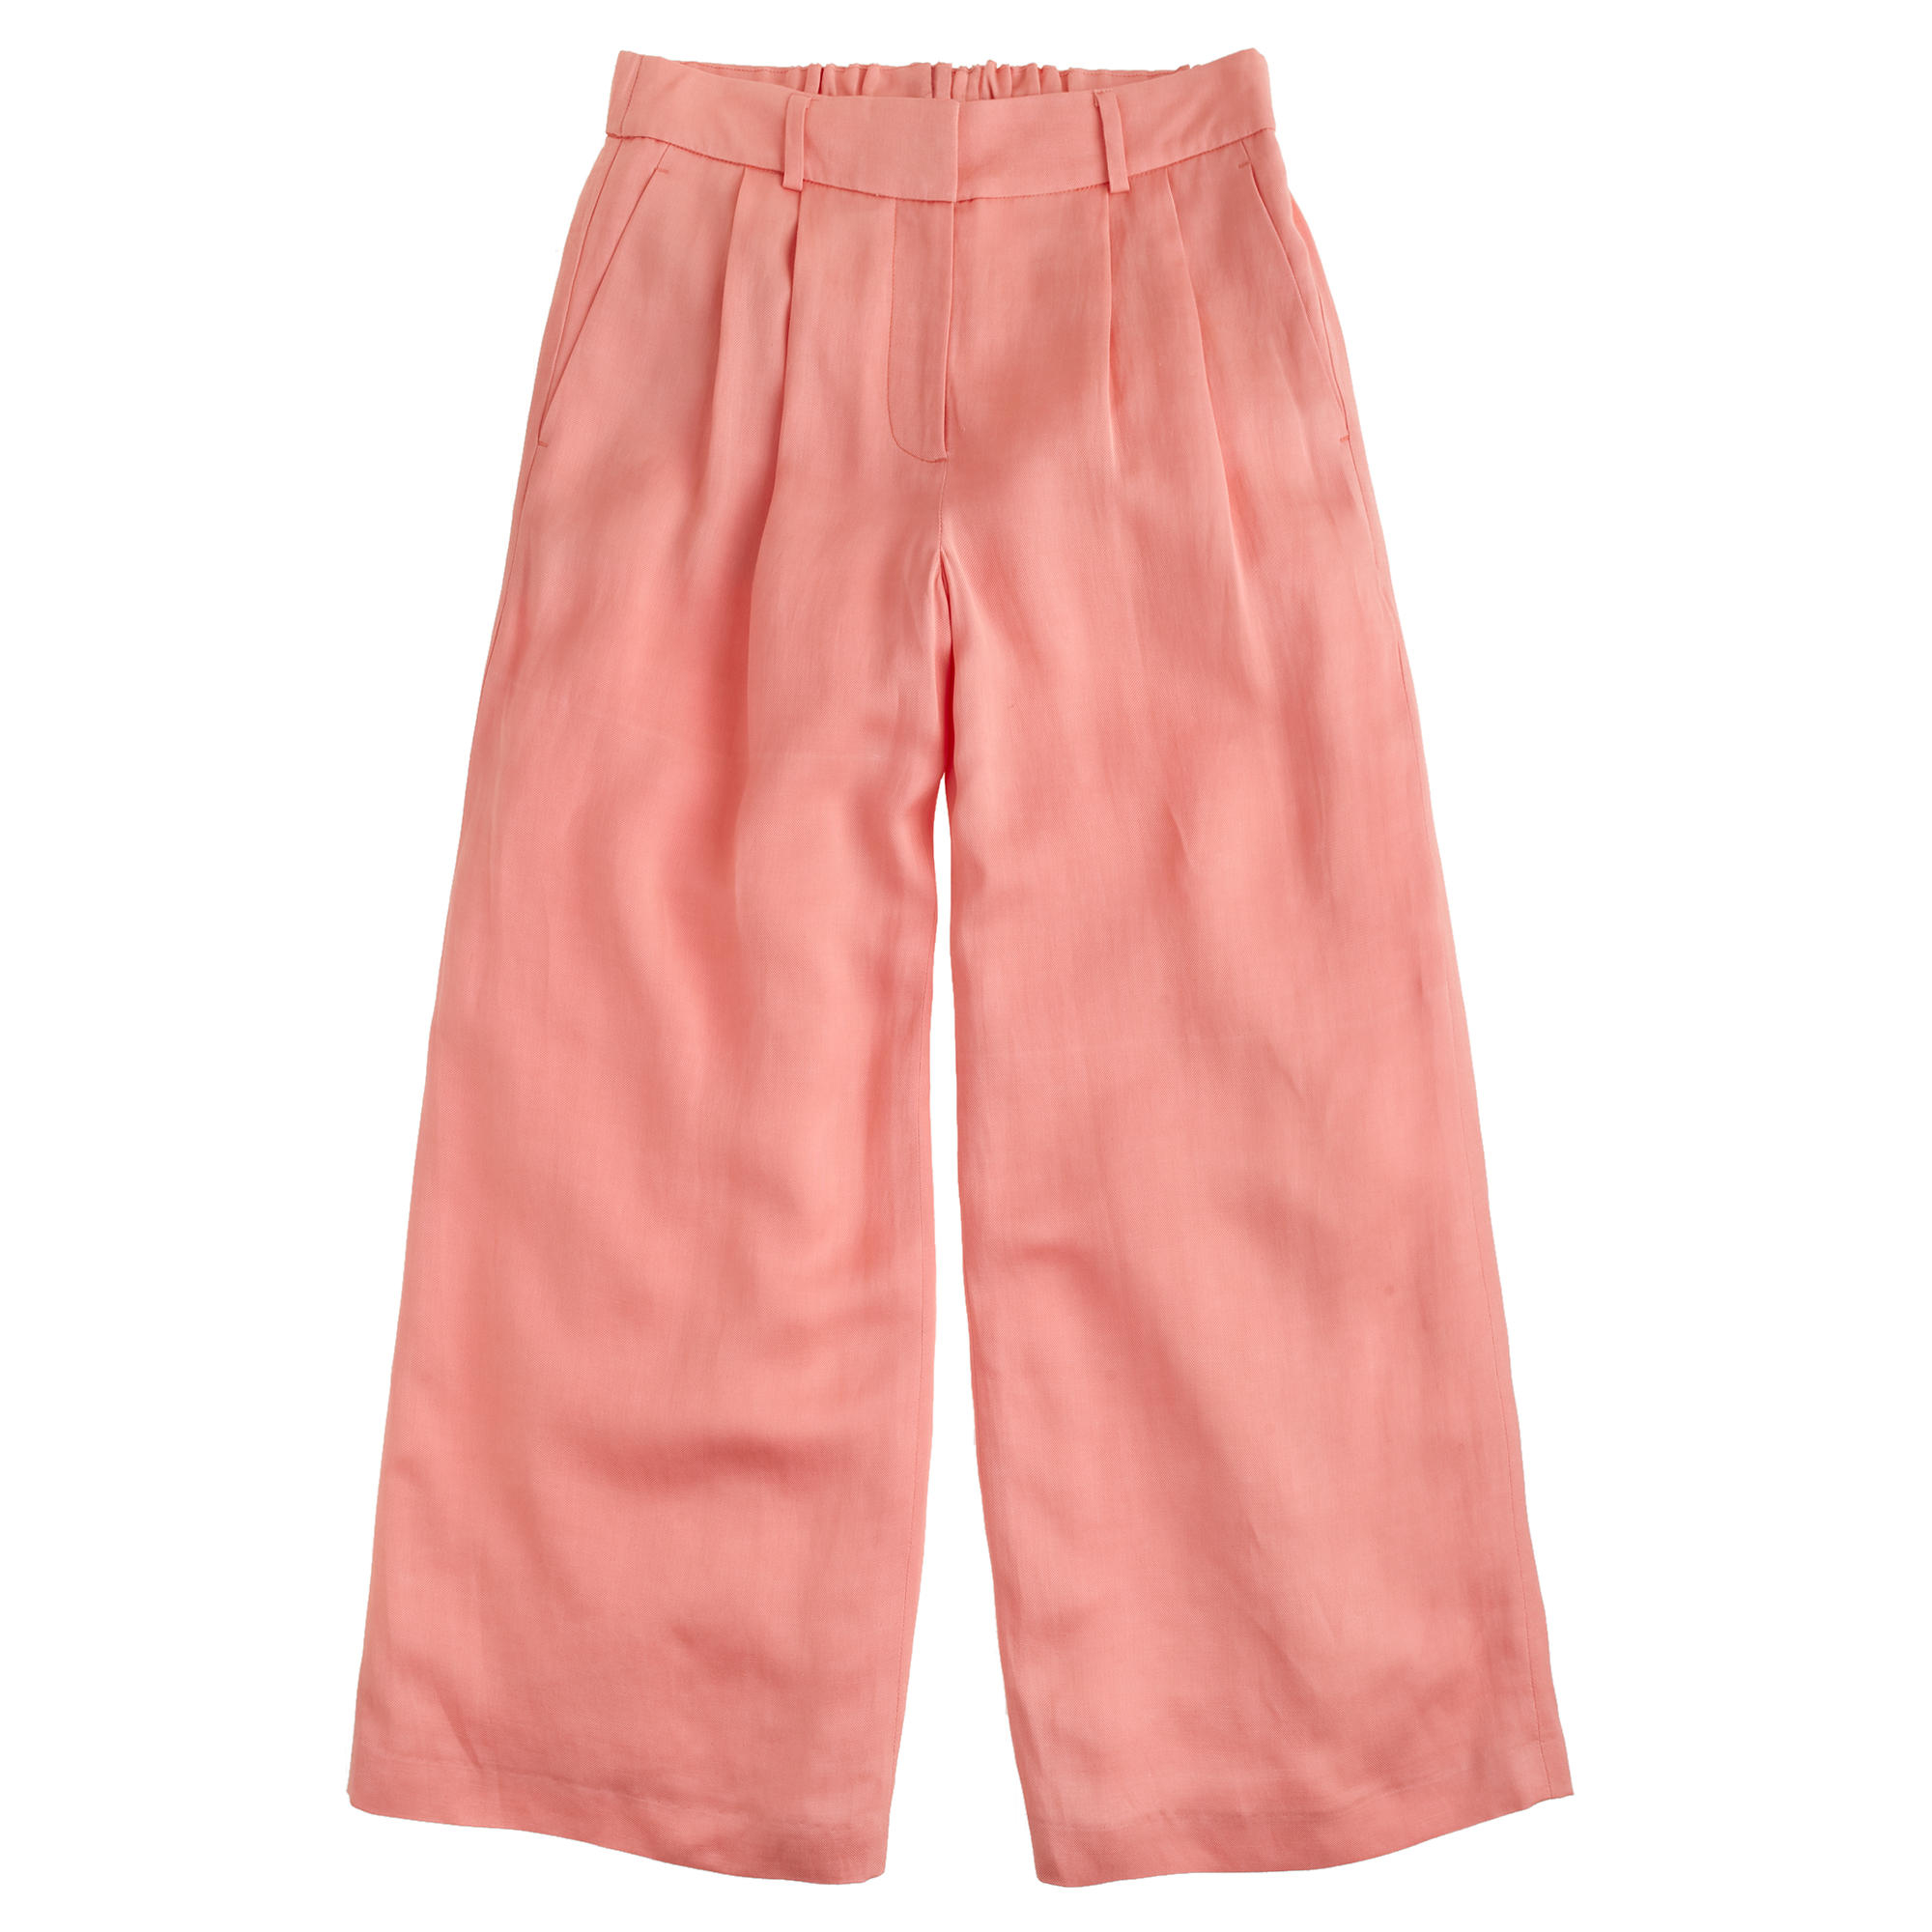 Lyst - J.Crew Collection Cropped Linen Pant in Pink